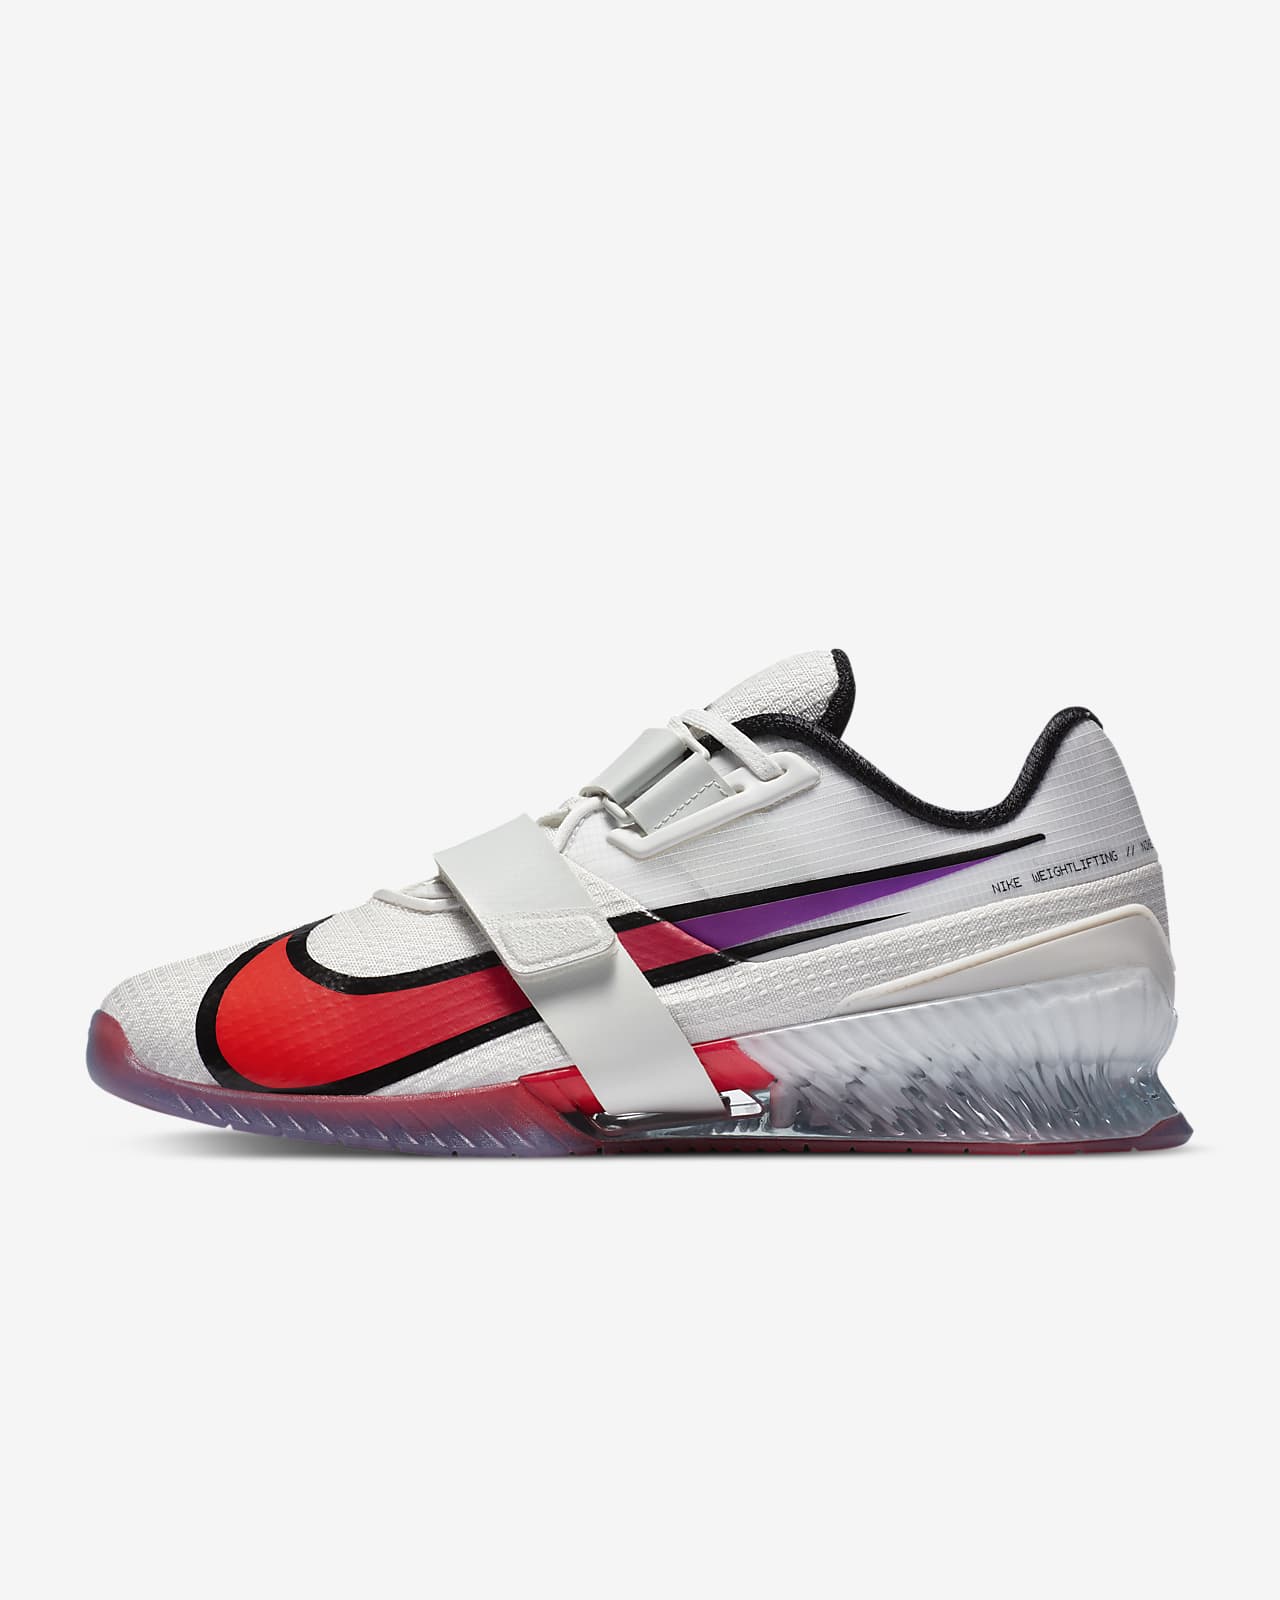 Nike Romaleos 4 SE Weightlifting Shoes